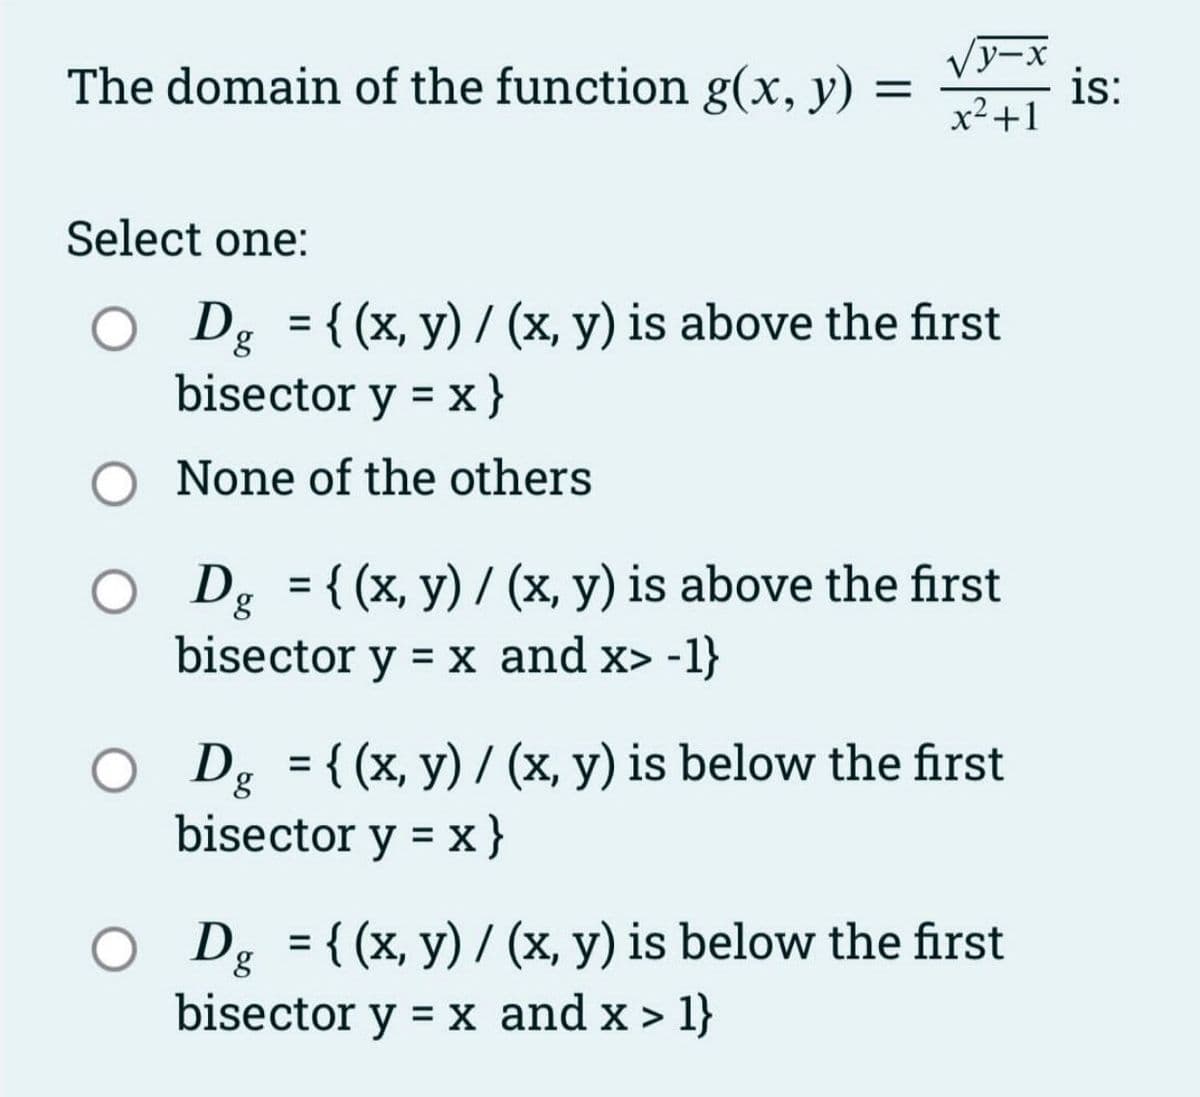 The domain of the function g(x, y) =
y-x
x² +1
Select one:
O Dg = {(x, y) / (x, y) is above the first
bisector y = x}
None of the others
O Dg = {(x, y) / (x, y) is above the first
bisector y = x and x> -1}
Dg = {(x, y)/(x, y) is below the first
bisector y = x }
Dg = {(x, y)/(x, y) is below the first
bisector y = x and x > 1}
is: